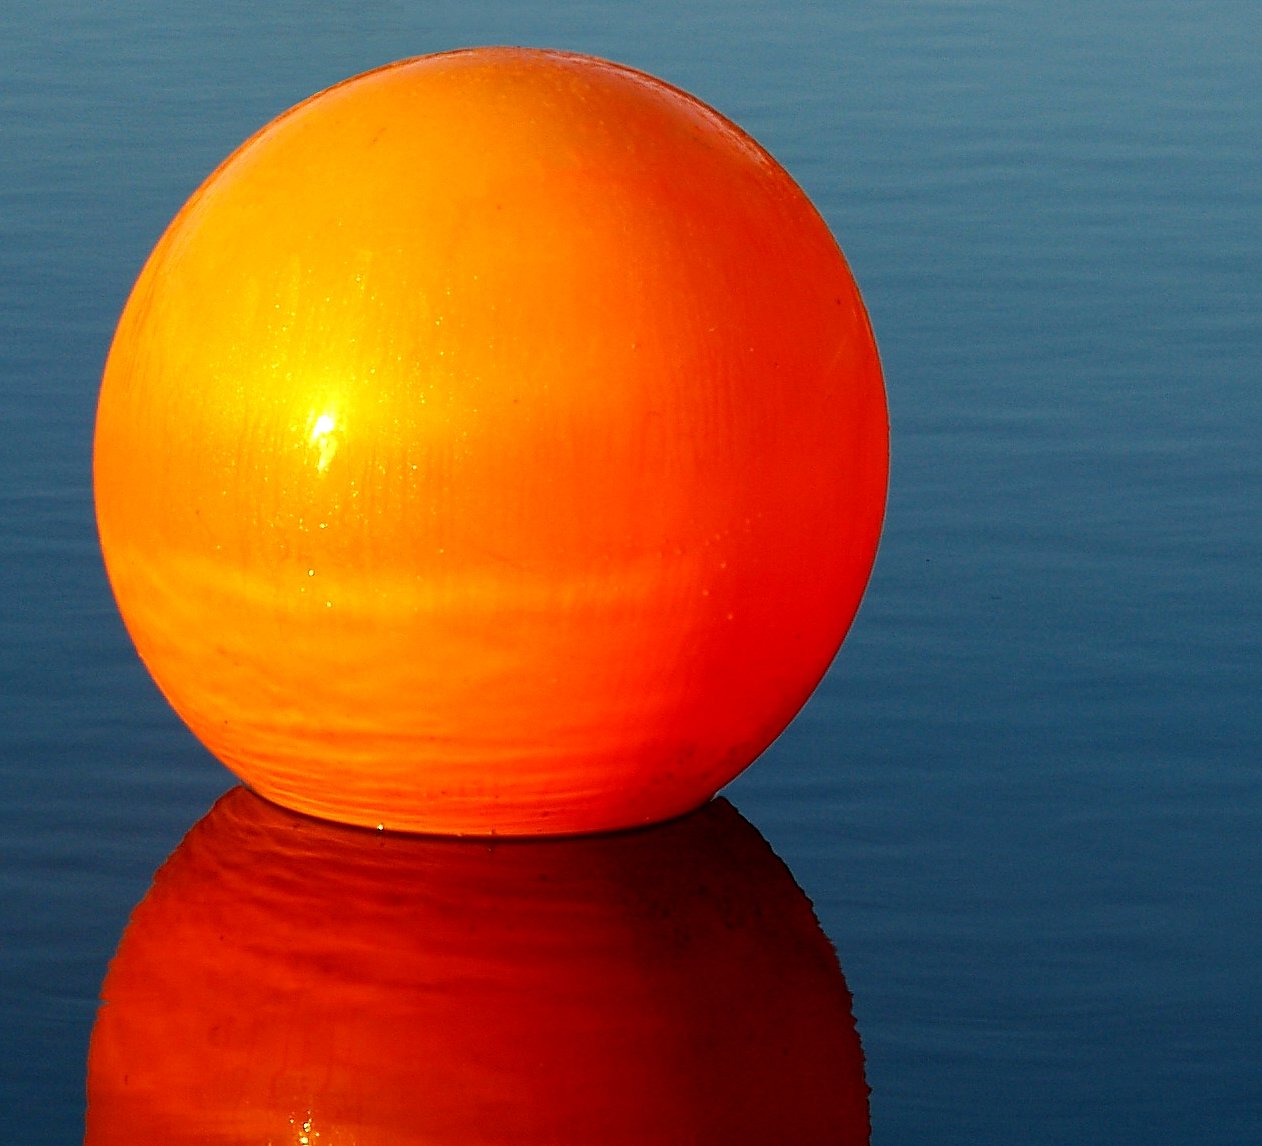 a orange object is sitting on a shiny surface